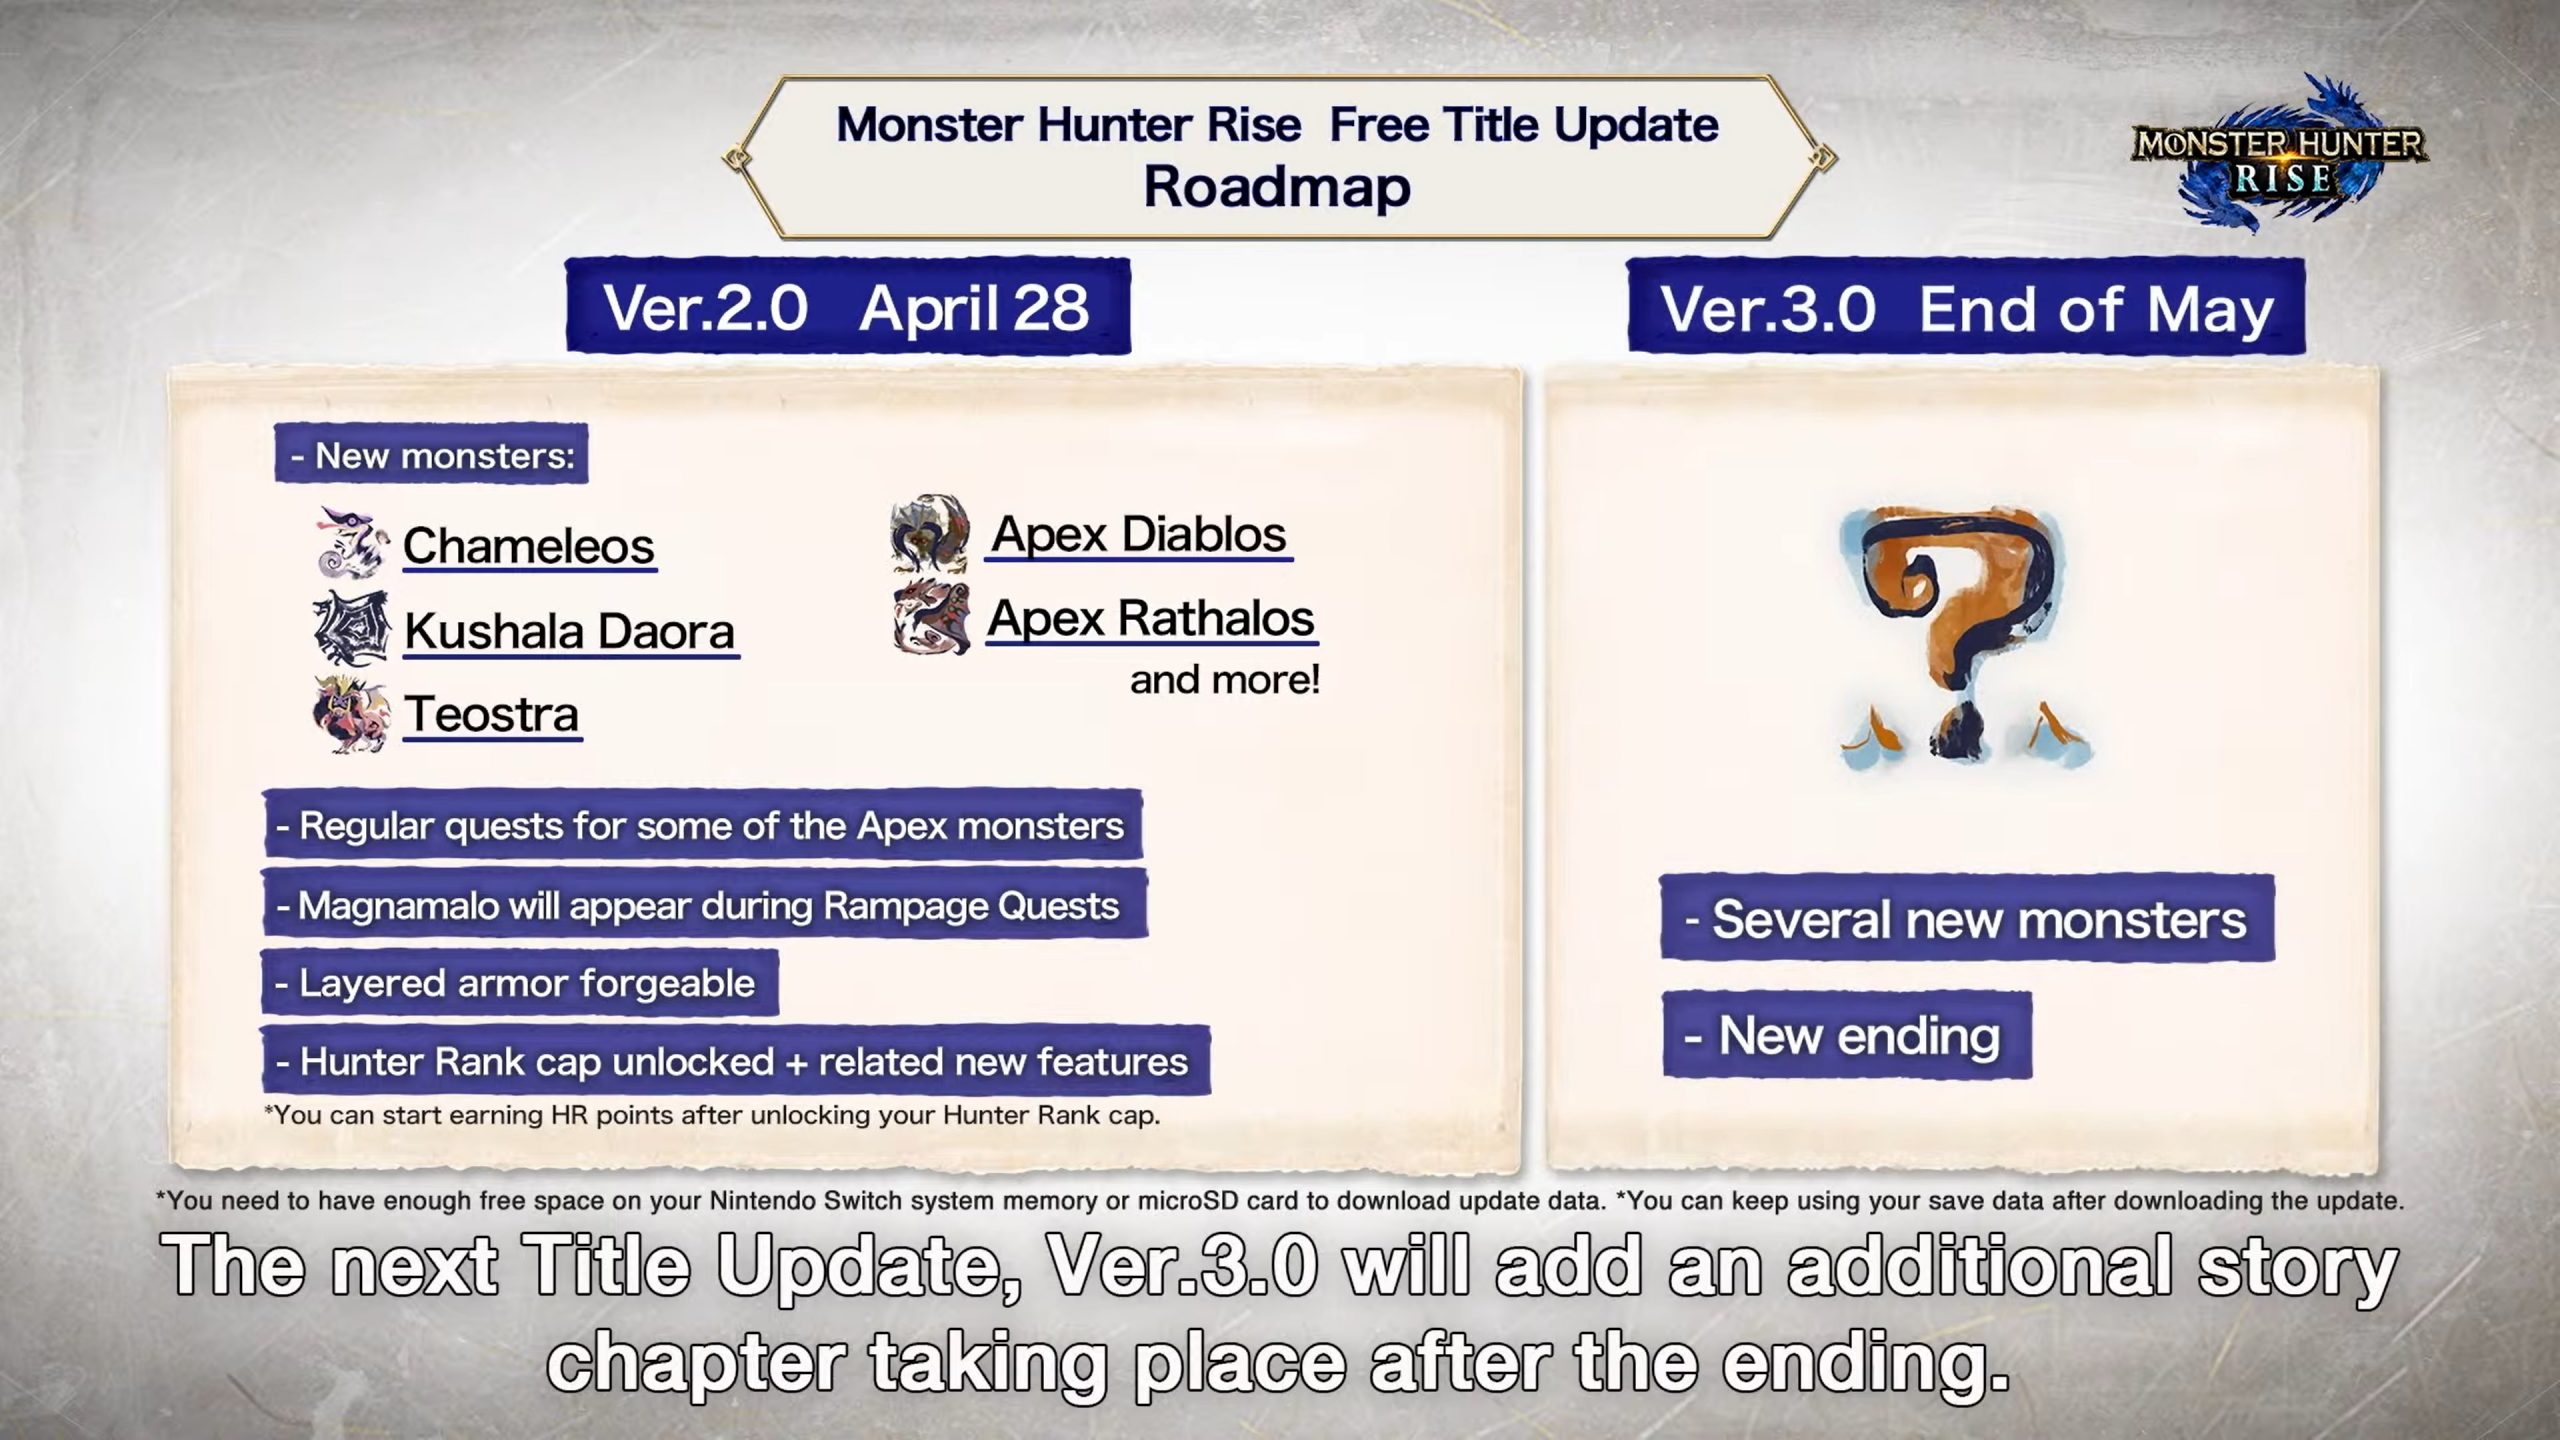 Monster Hunter Rise update roadmap shared, version 3.0 planned for May